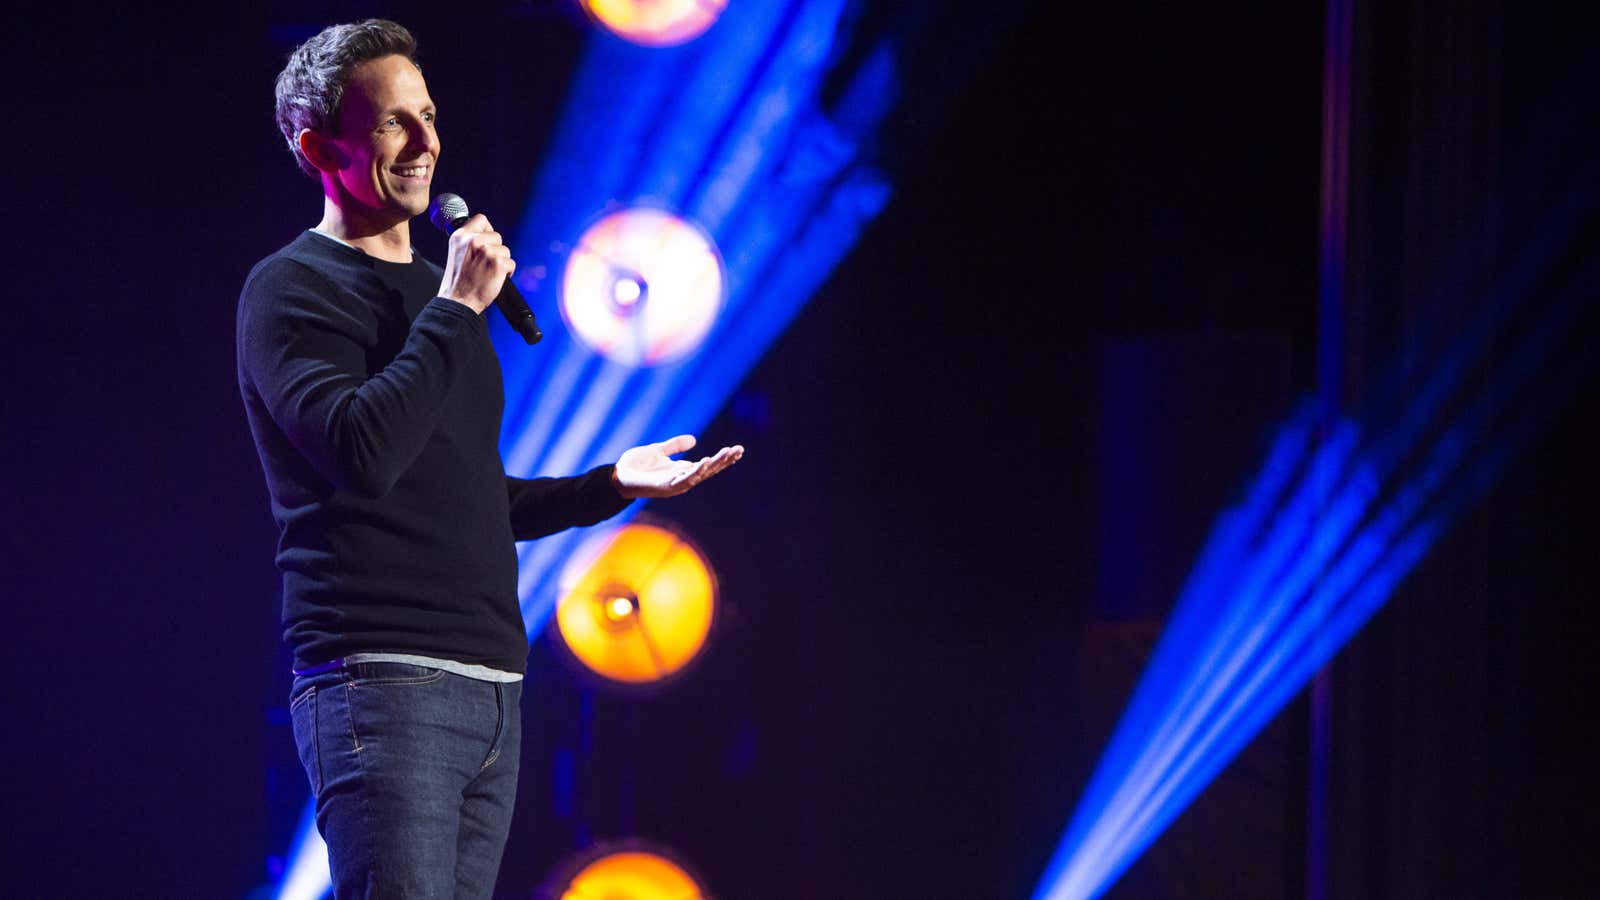 Seth Meyers’ new Netflix comedy special has an interesting feature.